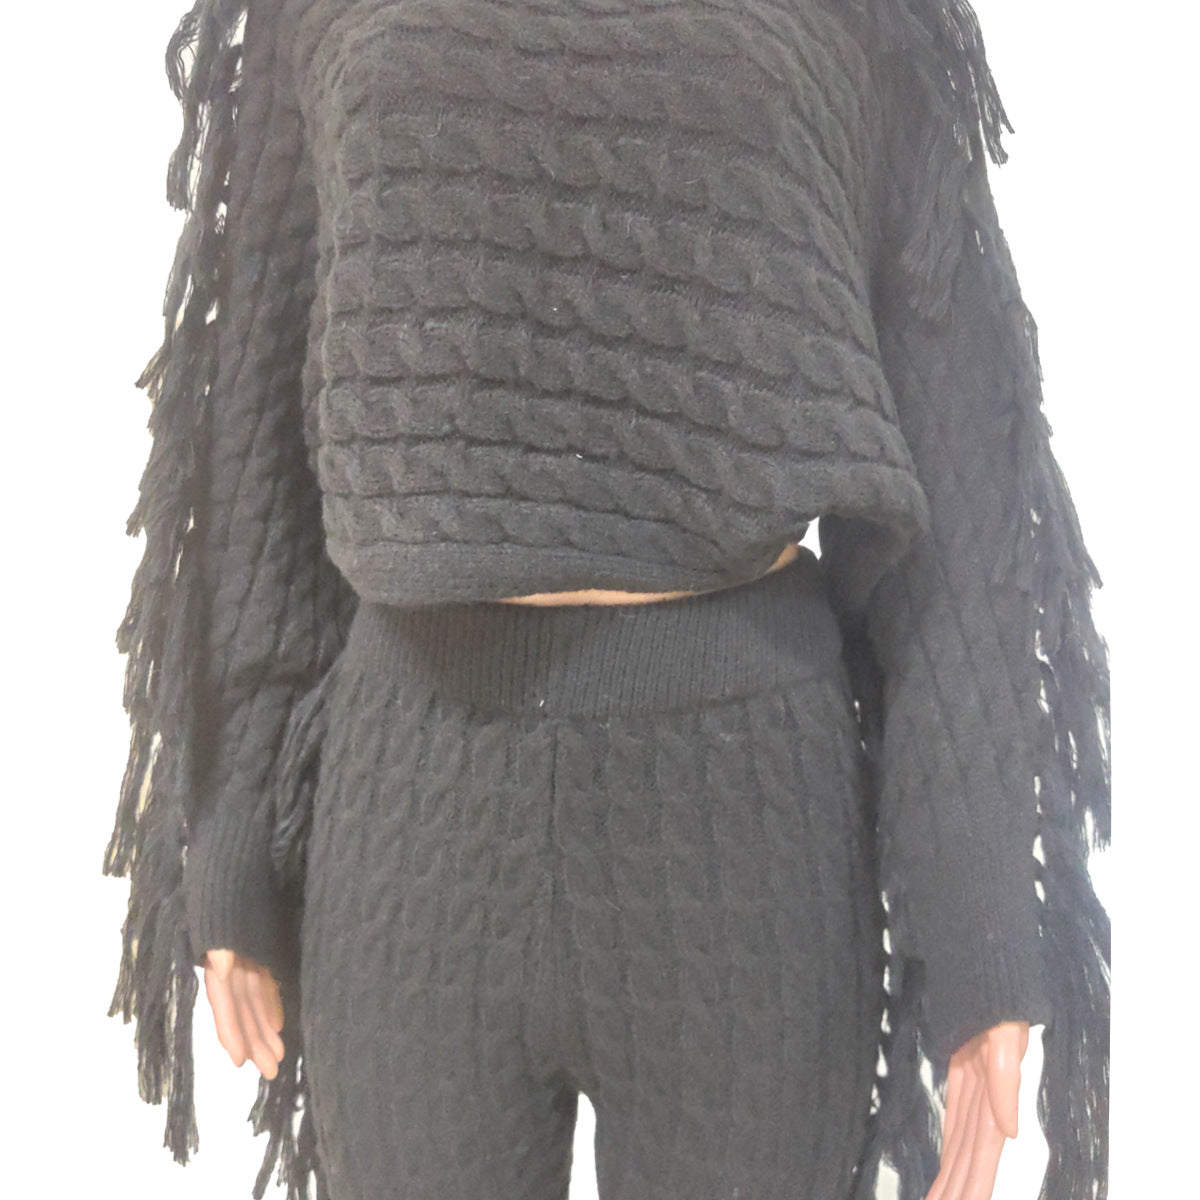 Tassel Sweater Two Piece Set - B.A.G.S (Black Apparel and Goods Store) 